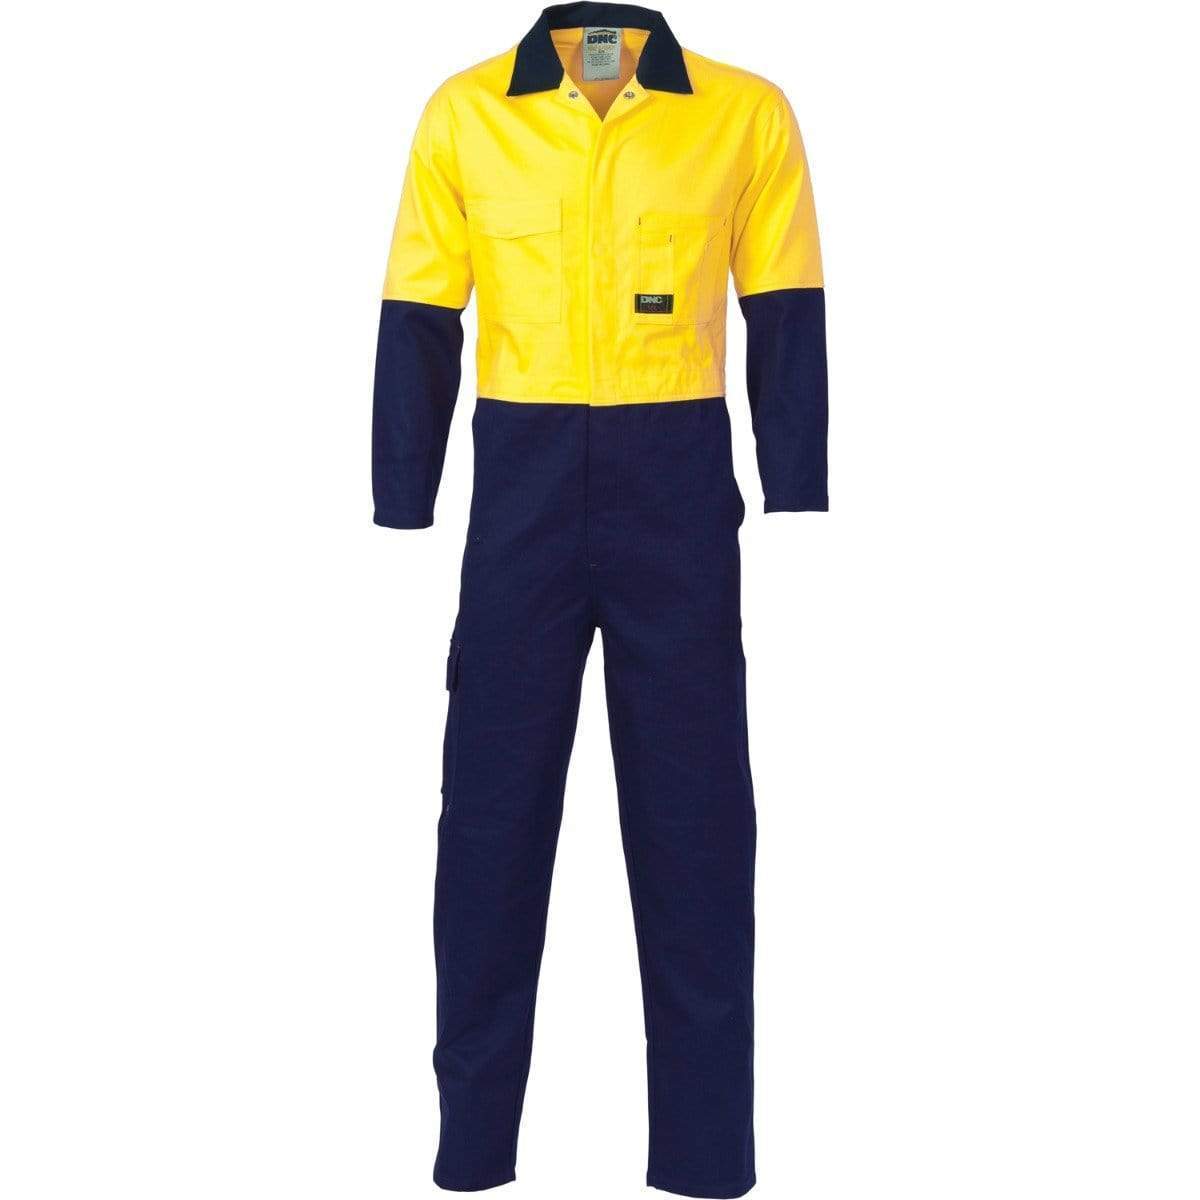 DNC Workwear Work Wear Yellow/Navy / 77R DNC WORKWEAR Hi-Vis Two-Tone Cotton Coverall 3851